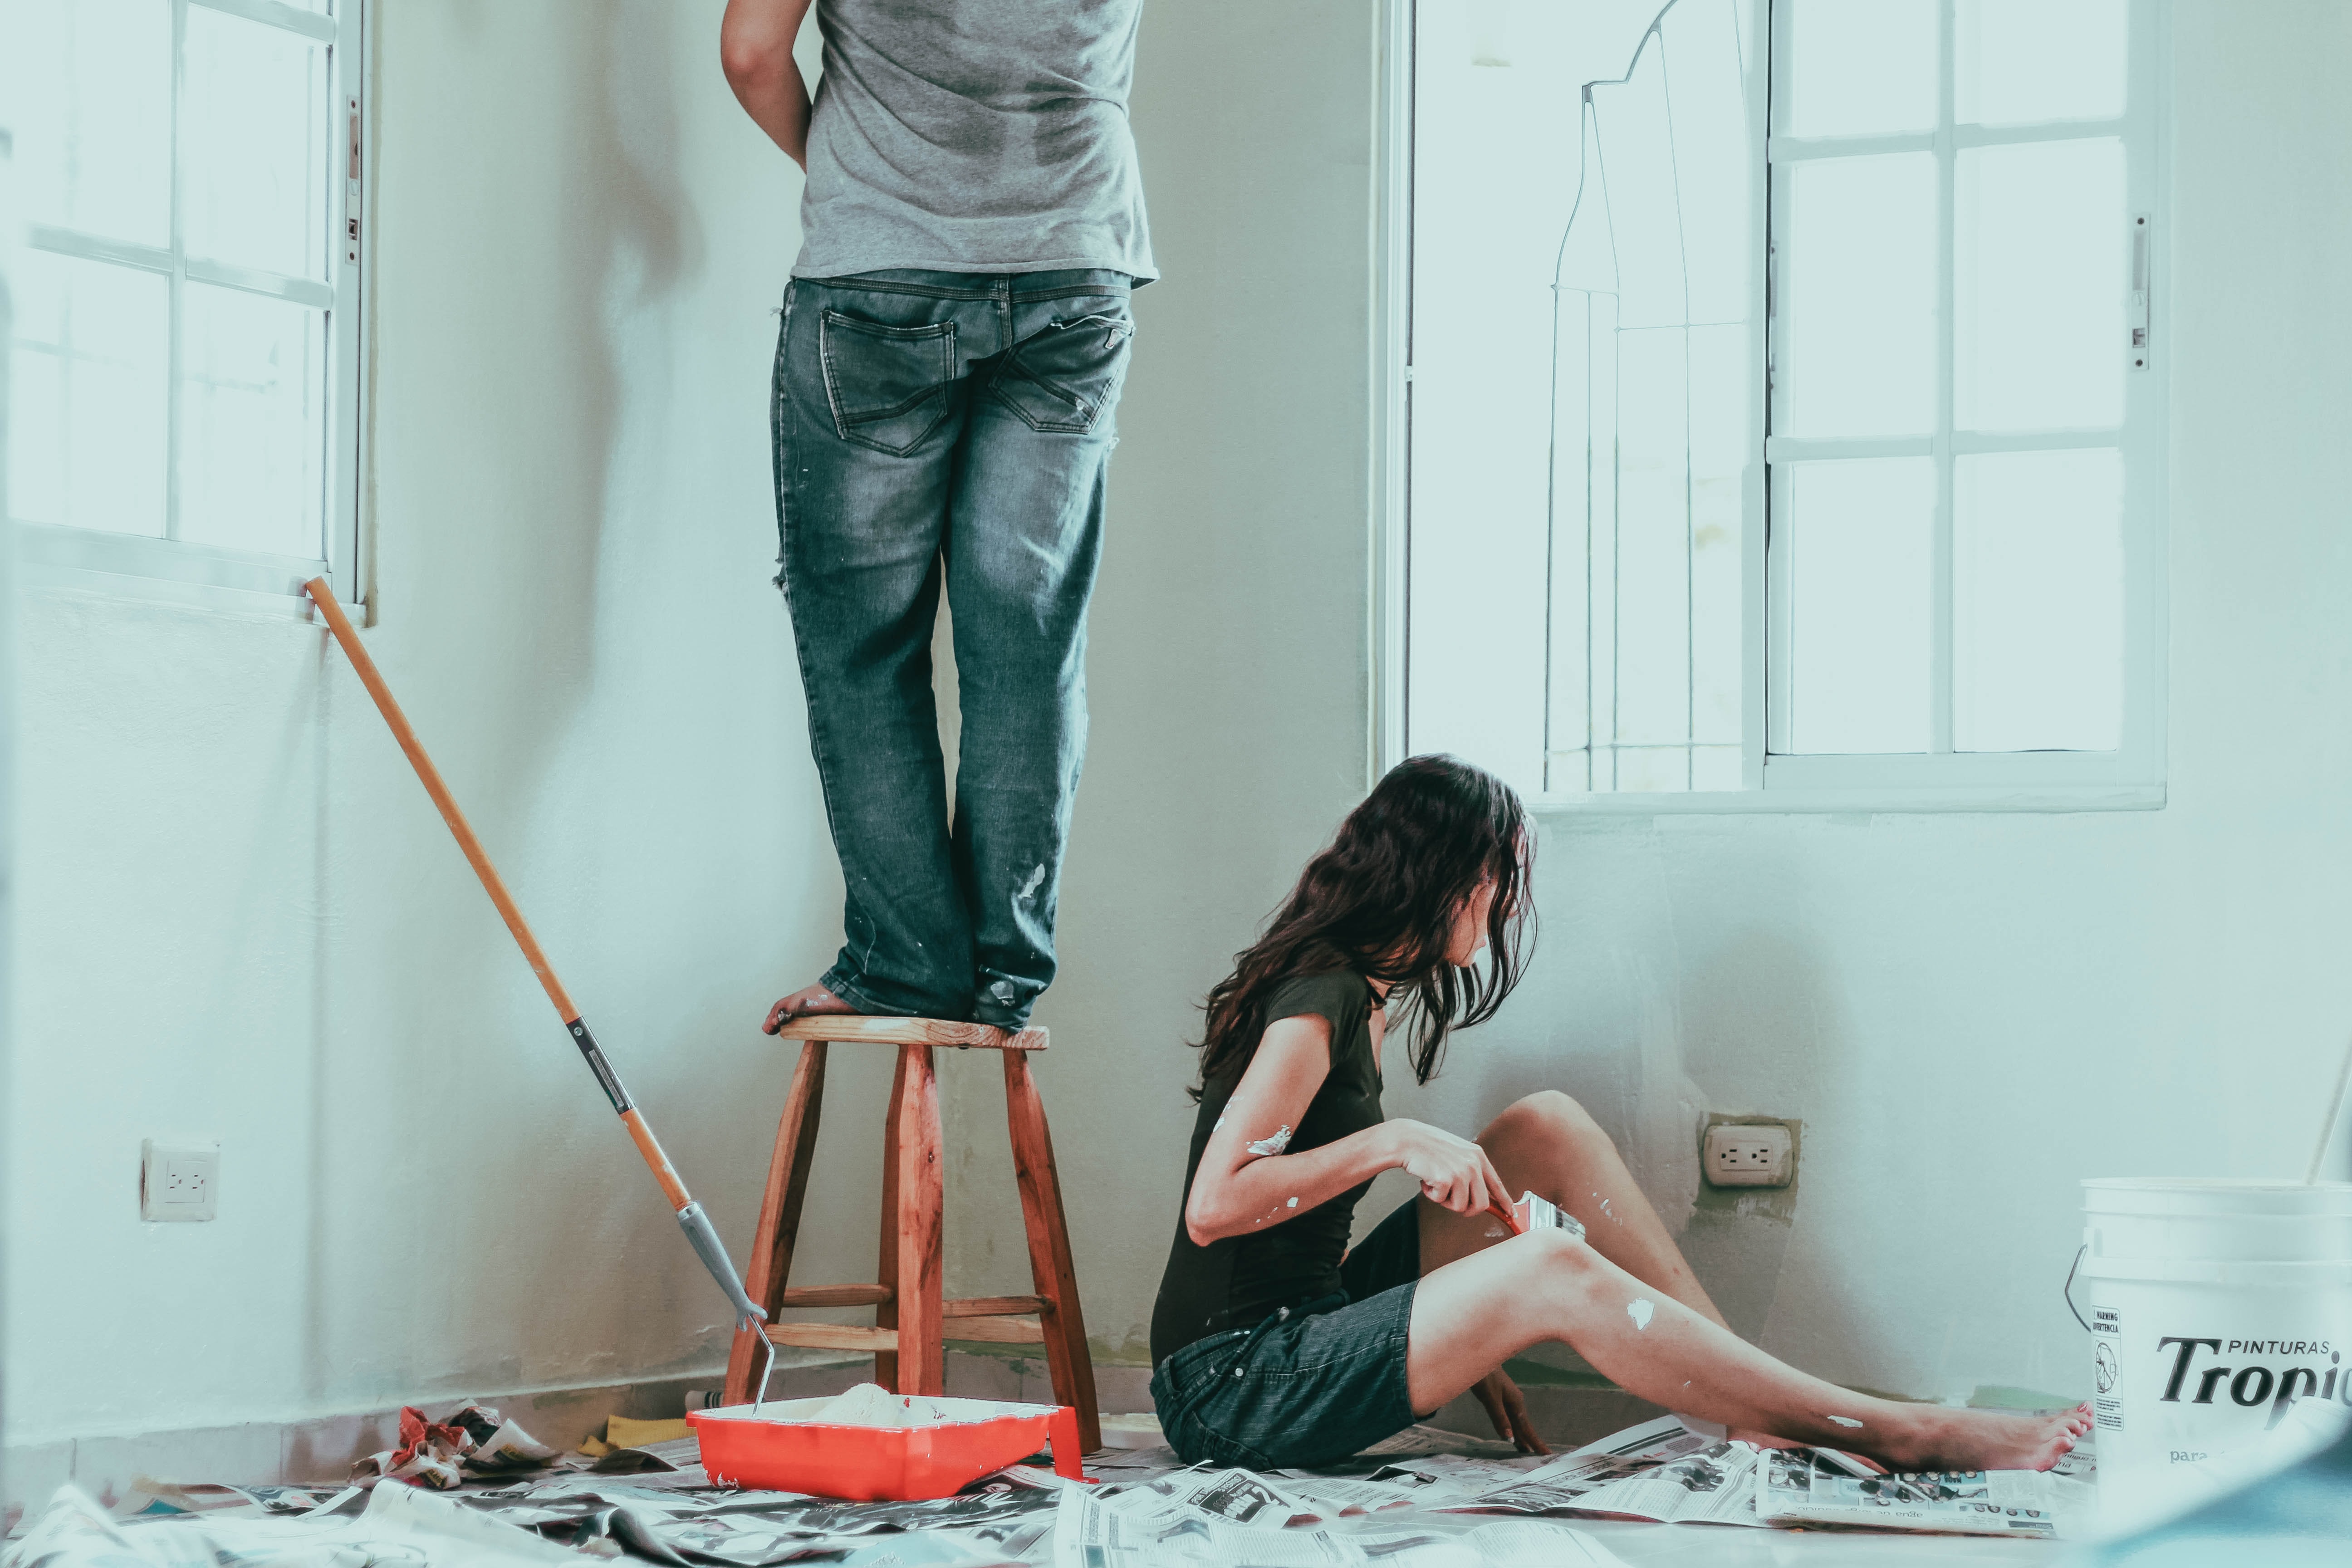 Top 10 Home Fixer Upper Trends In 2021. A couple painting a room together.